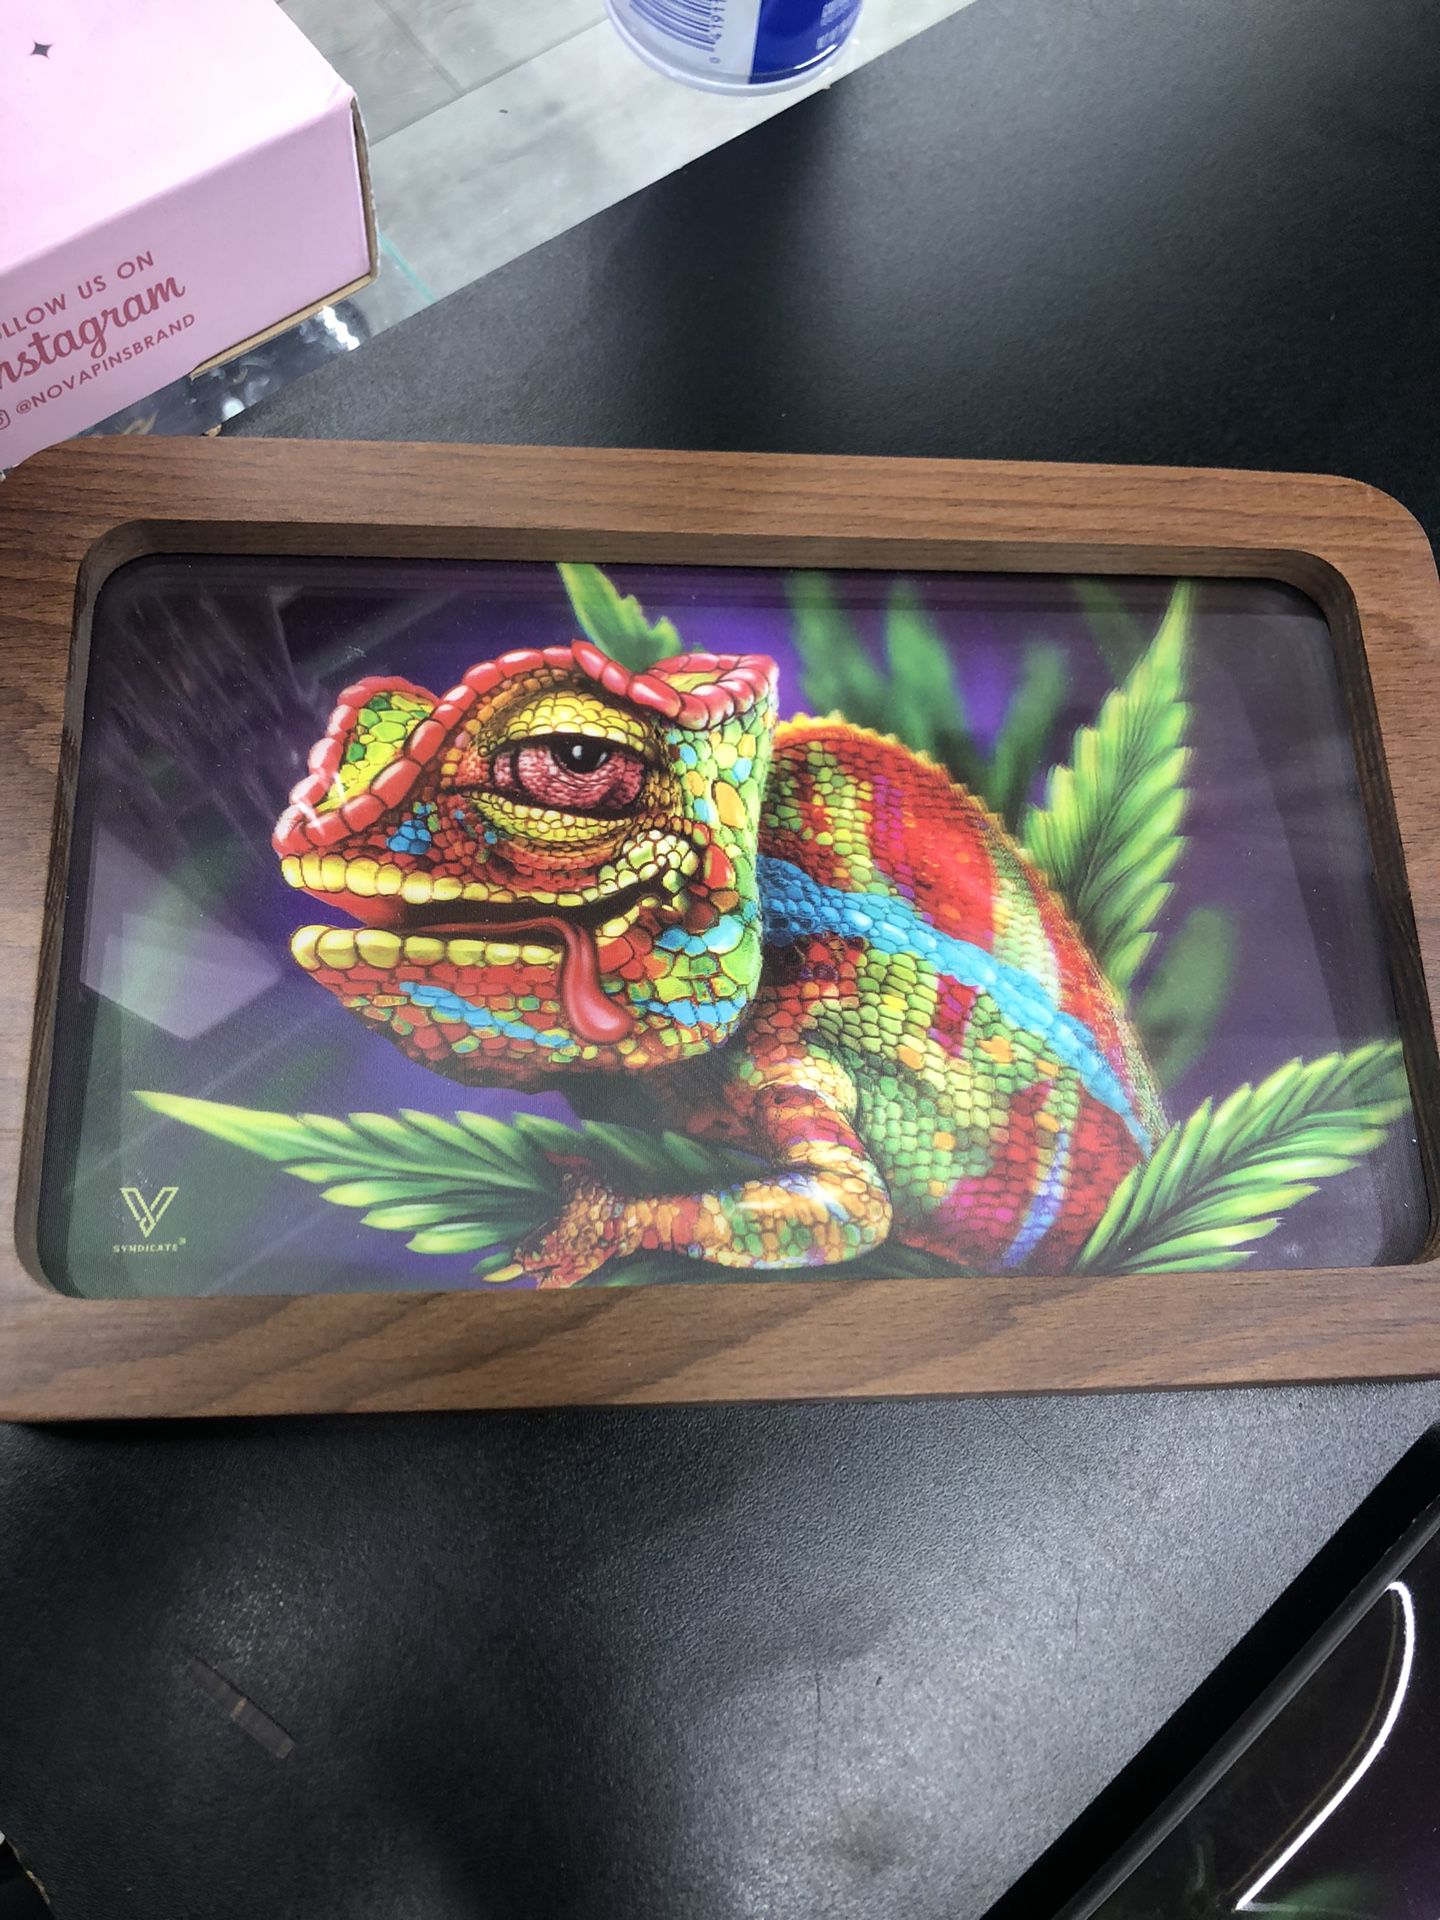 Trays Wood Work And Glass Have Different Styles $20 Each Or $25 Shipped 